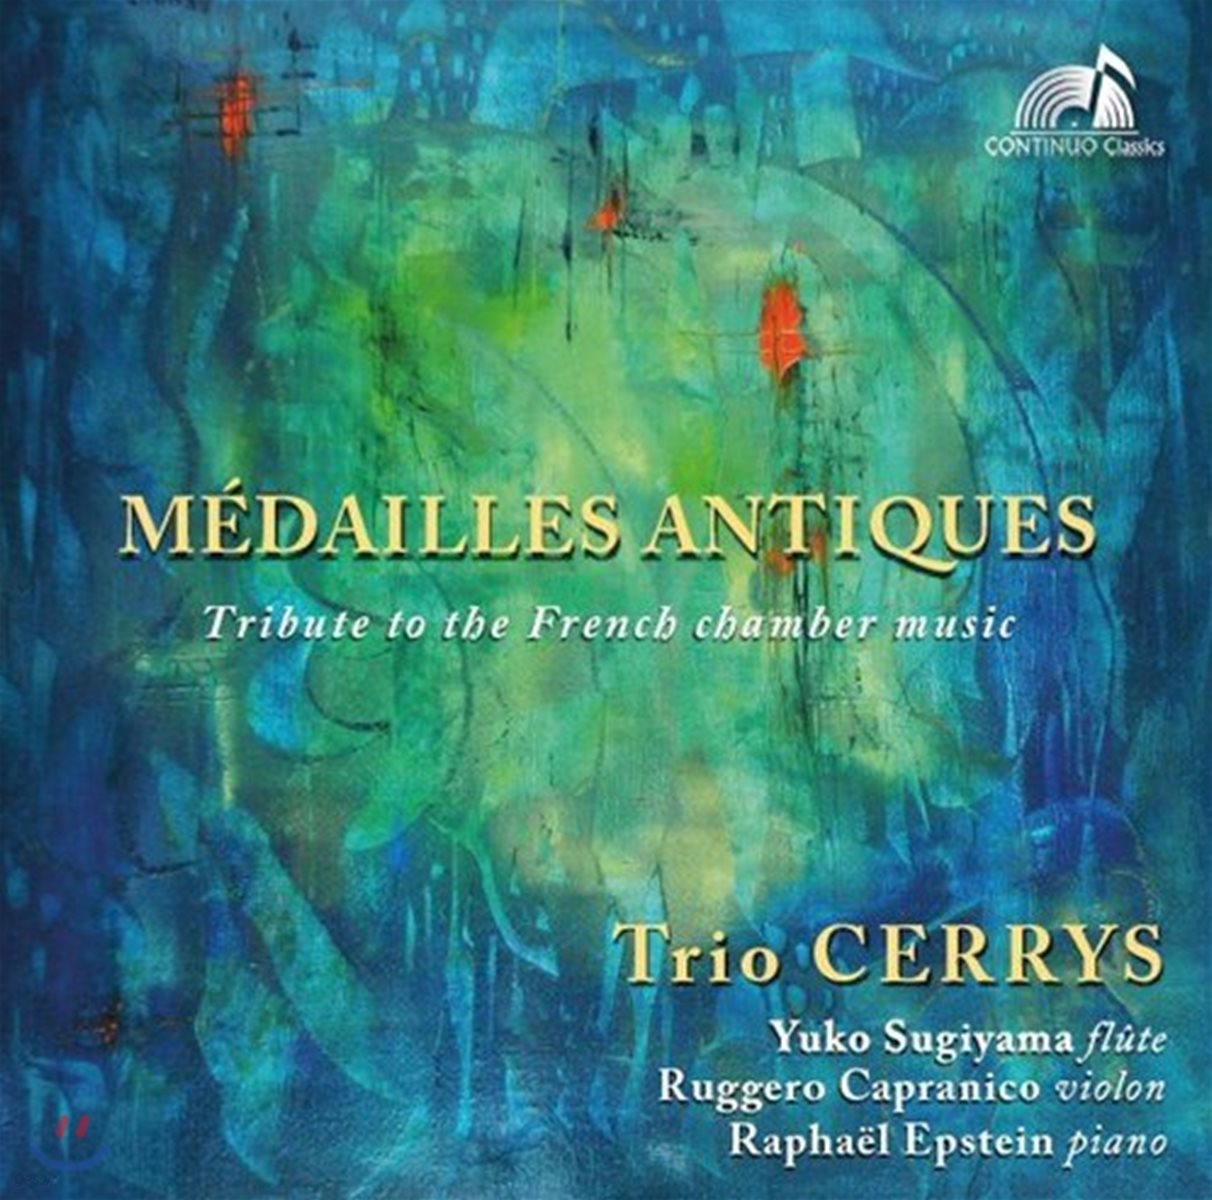 Trio Cerrys 프랑스 실내악 모음집 - &#39;오래된 메달&#39; (Medailles Antiques - Tribute To The French Chamber Music) 트리오 세뤼스